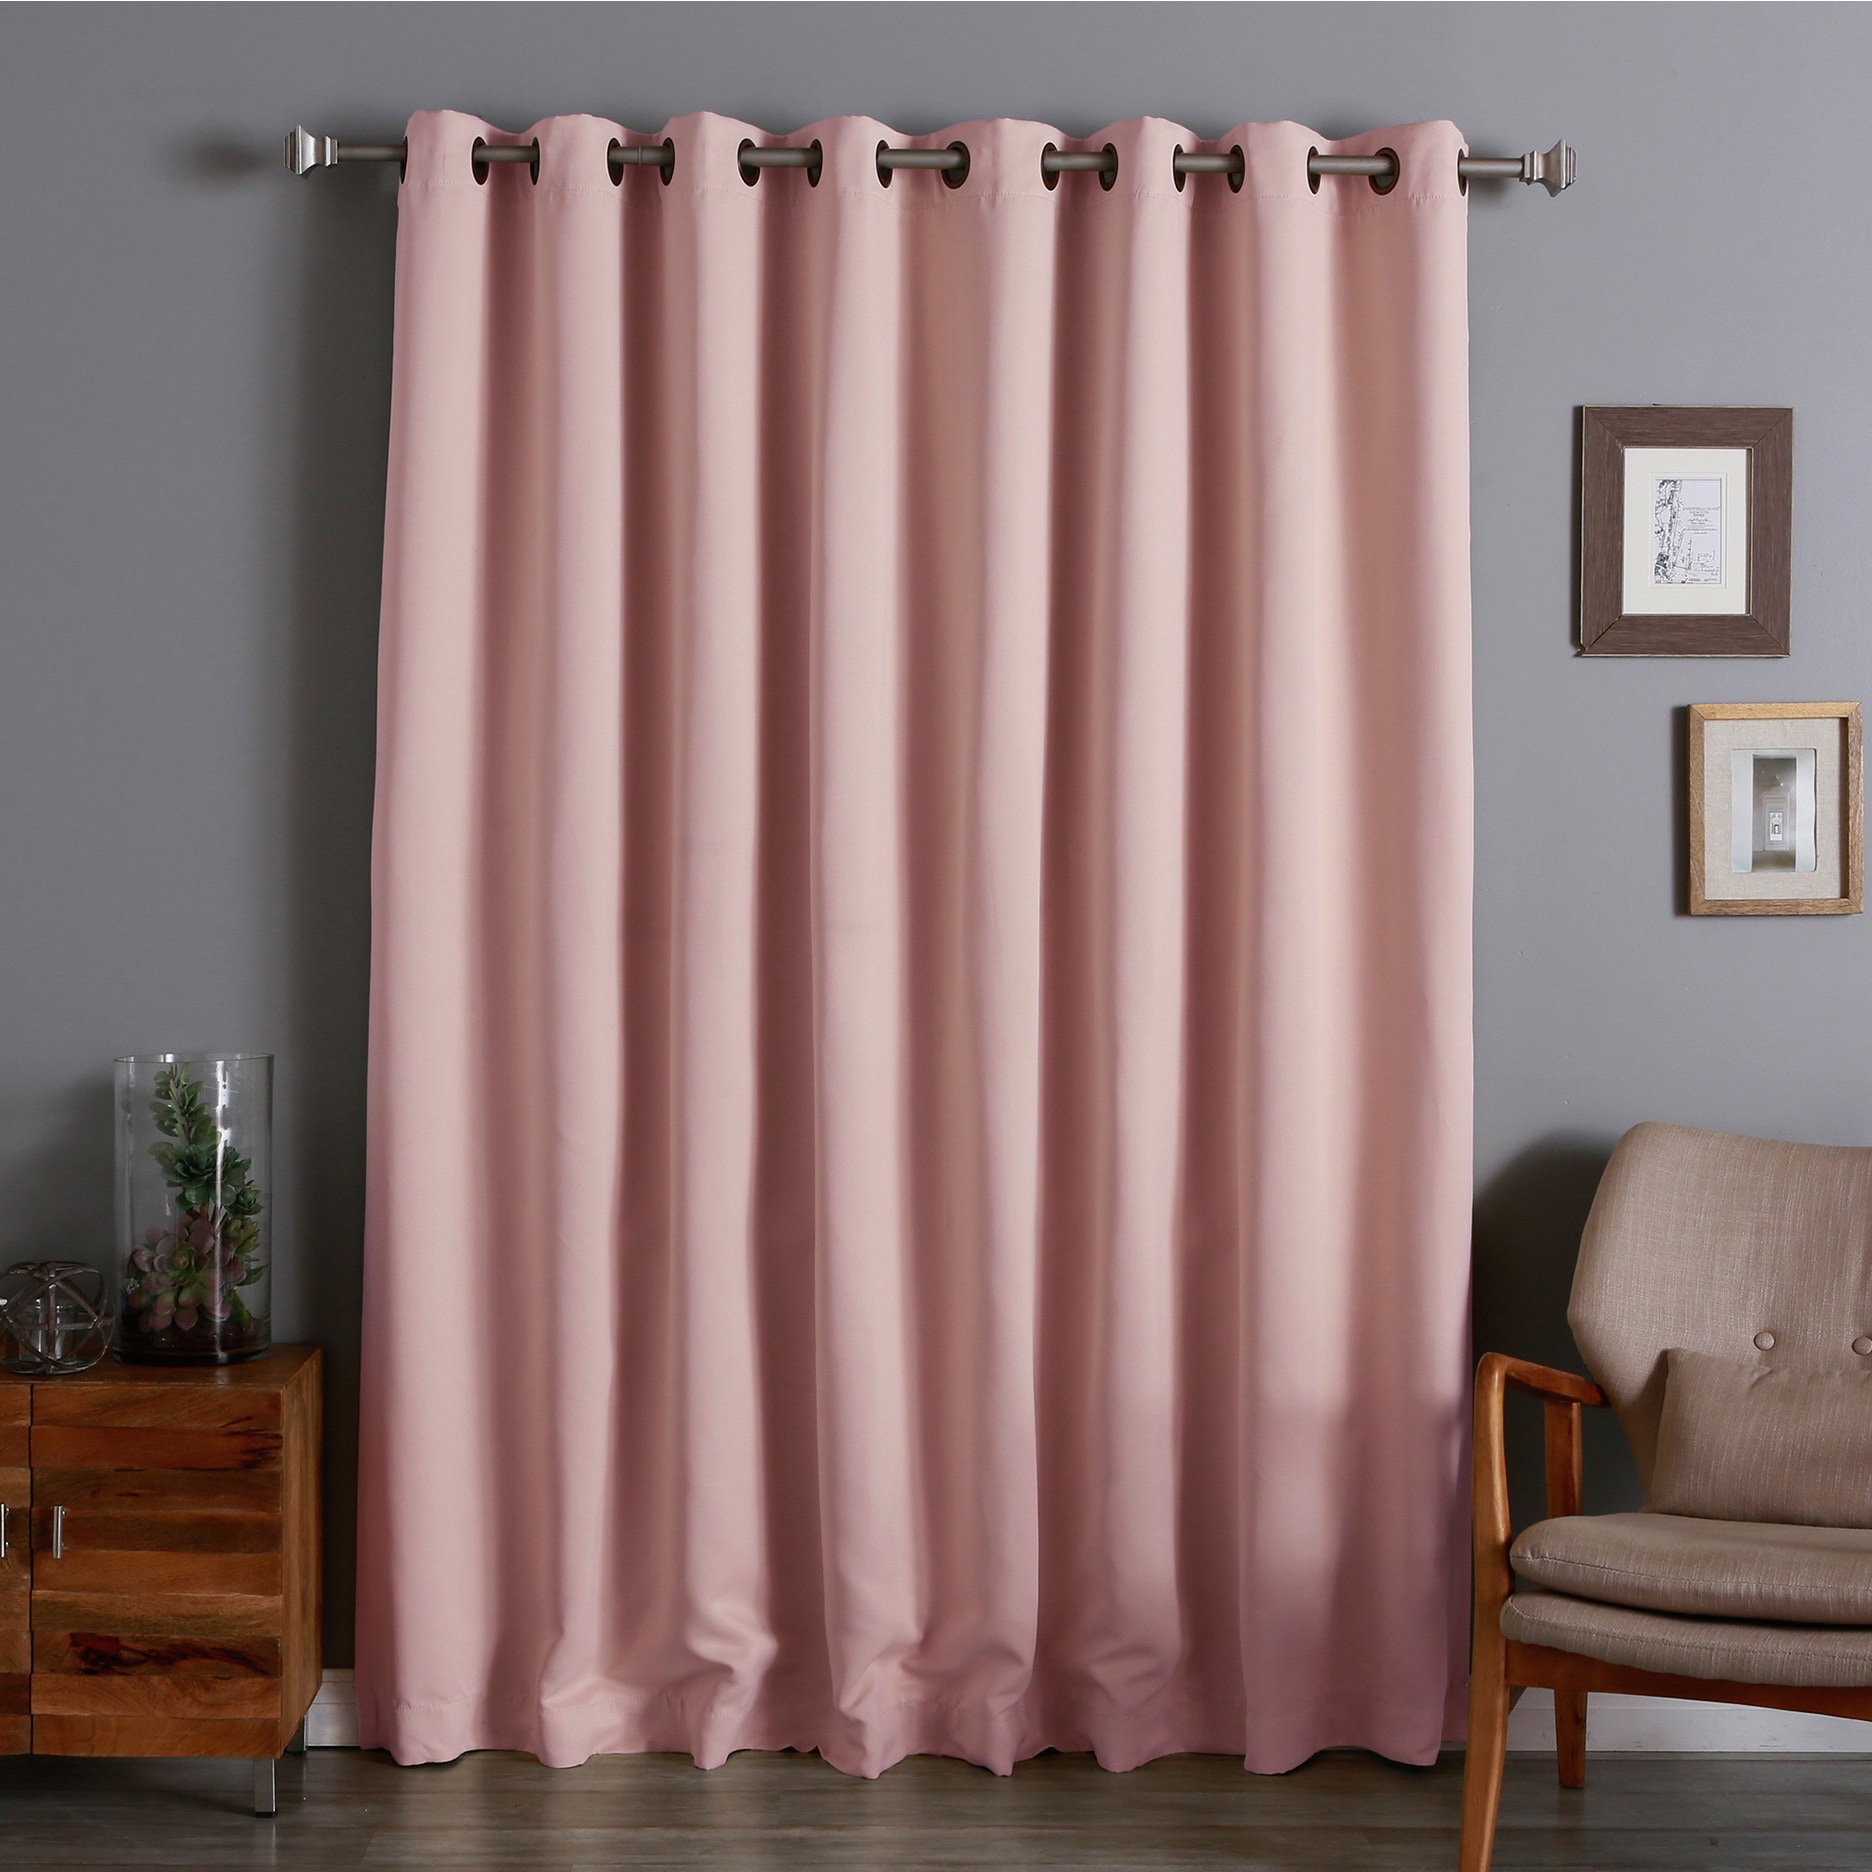 Set of 1 Panel 84 W x 96 L Blackout Curtains for Boys Bedroom Double Layers Grommet Top Window Curtain with Liner Beige and Tan Linen Blackout Curtain 96 Inches Long 